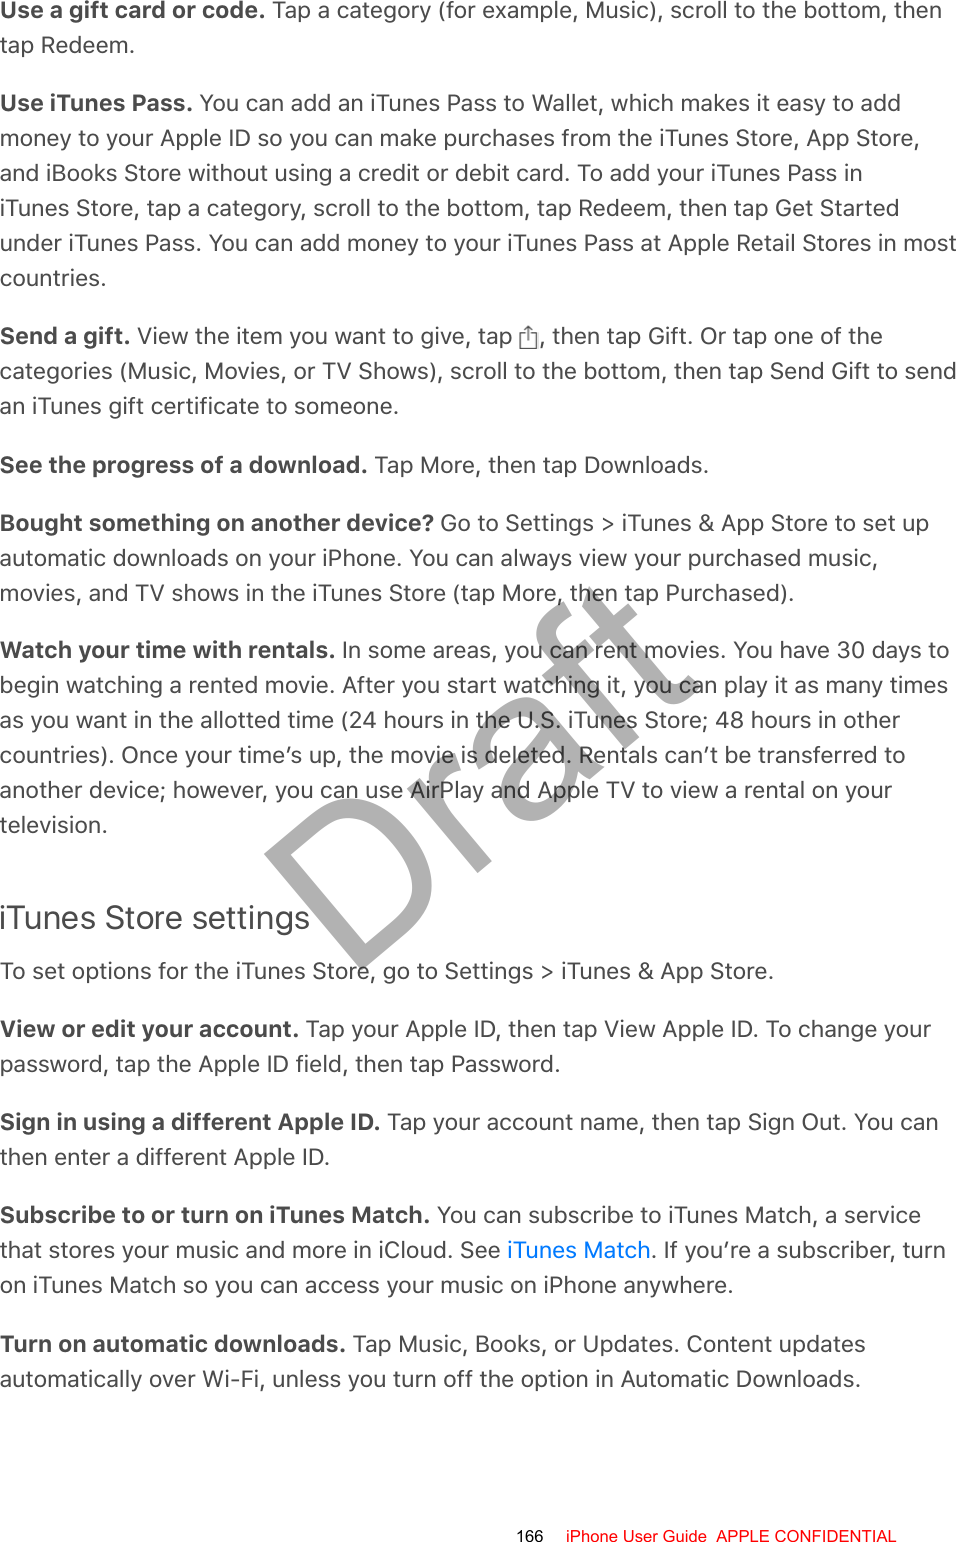 Use a gift card or code. Tap a category (for example, Music), scroll to the bottom, thentap Redeem.Use iTunes Pass. You can add an iTunes Pass to Wallet, which makes it easy to addmoney to your Apple ID so you can make purchases from the iTunes Store, App Store,and iBooks Store without using a credit or debit card. To add your iTunes Pass iniTunes Store, tap a category, scroll to the bottom, tap Redeem, then tap Get Startedunder iTunes Pass. You can add money to your iTunes Pass at Apple Retail Stores in mostcountries.Send a gift. View the item you want to give, tap  , then tap Gift. Or tap one of thecategories (Music, Movies, or TV Shows), scroll to the bottom, then tap Send Gift to sendan iTunes gift certificate to someone.See the progress of a download. Tap More, then tap Downloads.Bought something on another device? Go to Settings &gt; iTunes &amp; App Store to set upautomatic downloads on your iPhone. You can always view your purchased music,movies, and TV shows in the iTunes Store (tap More, then tap Purchased).Watch your time with rentals. In some areas, you can rent movies. You have 30 days tobegin watching a rented movie. After you start watching it, you can play it as many timesas you want in the allotted time (24 hours in the U.S. iTunes Store; 48 hours in othercountries). Once your time’s up, the movie is deleted. Rentals can’t be transferred toanother device; however, you can use AirPlay and Apple TV to view a rental on yourtelevision.iTunes Store settingsTo set options for the iTunes Store, go to Settings &gt; iTunes &amp; App Store.View or edit your account. Tap your Apple ID, then tap View Apple ID. To change yourpassword, tap the Apple ID field, then tap Password.Sign in using a different Apple ID. Tap your account name, then tap Sign Out. You canthen enter a different Apple ID.Subscribe to or turn on iTunes Match. You can subscribe to iTunes Match, a servicethat stores your music and more in iCloud. See  . If you’re a subscriber, turnon iTunes Match so you can access your music on iPhone anywhere.Turn on automatic downloads. Tap Music, Books, or Updates. Content updatesautomatically over Wi-Fi, unless you turn off the option in Automatic Downloads.iTunes Match166 iPhone User Guide  APPLE CONFIDENTIALDraft